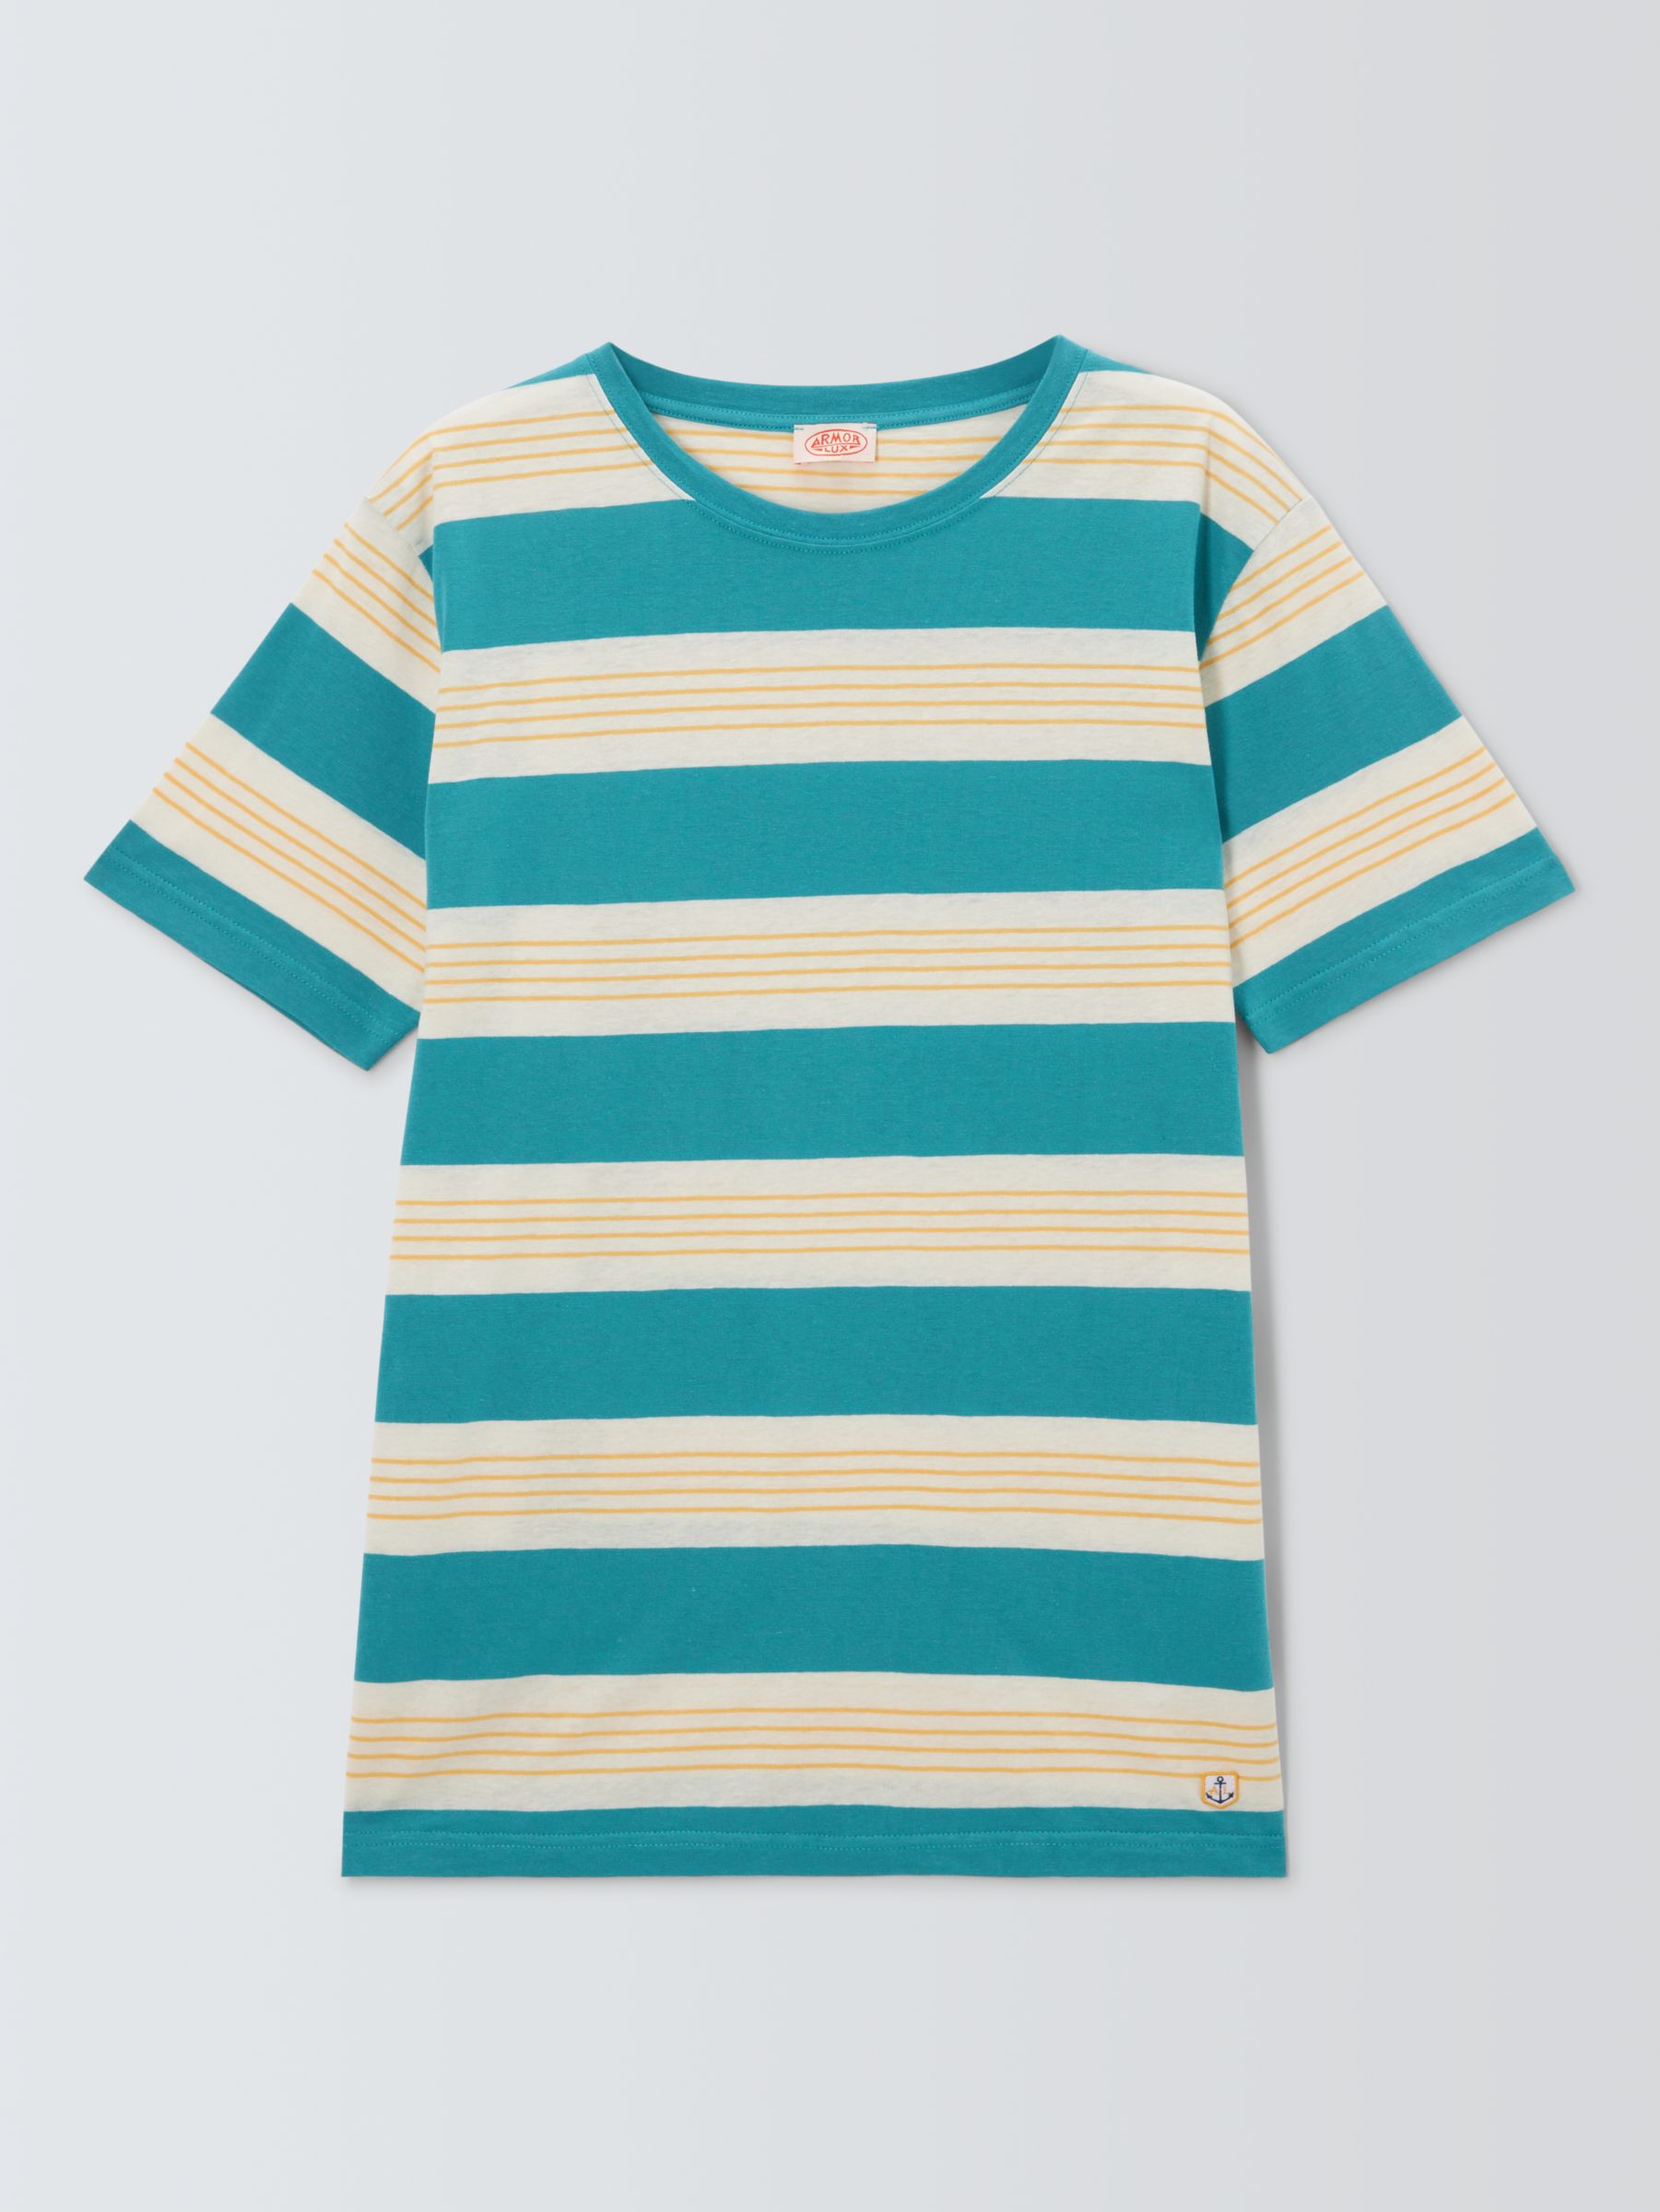 Buy Armor Lux MC Heritage Striped T-Shirt, Pagoda/Yellow Online at johnlewis.com